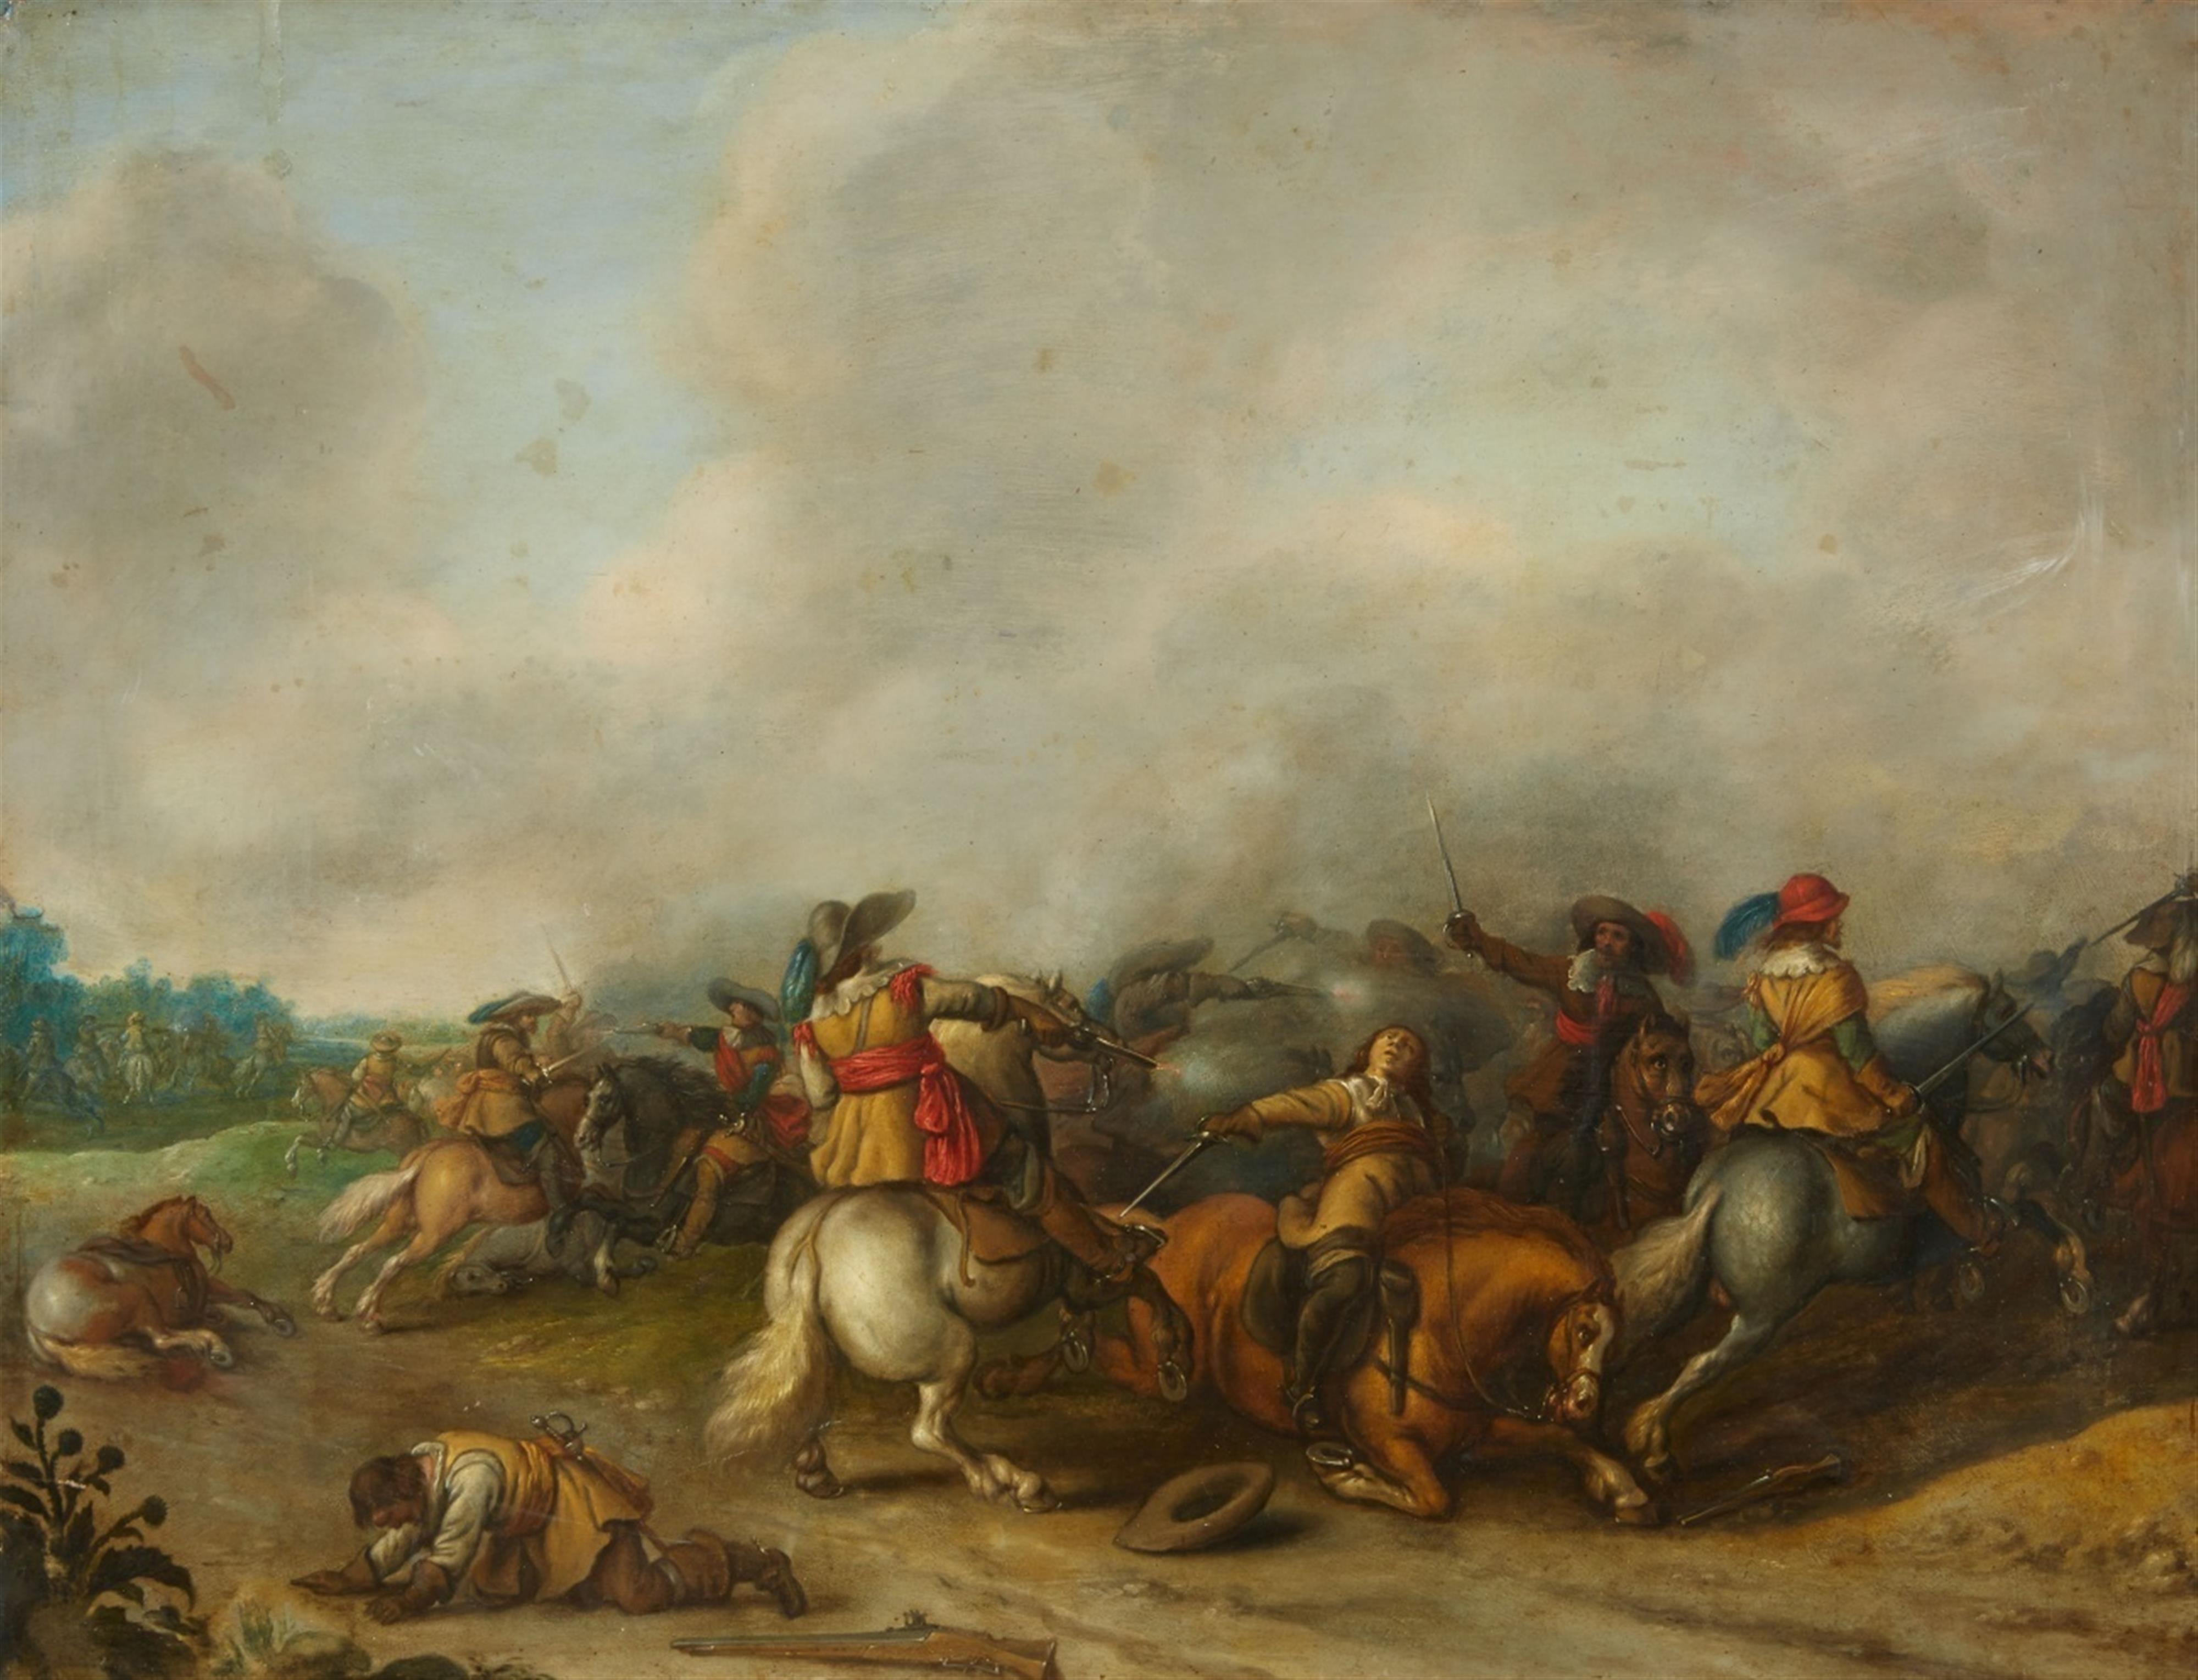 Palamedes Palamedesz. - A Cavalry Battle in a Panoramic Landscape - image-1